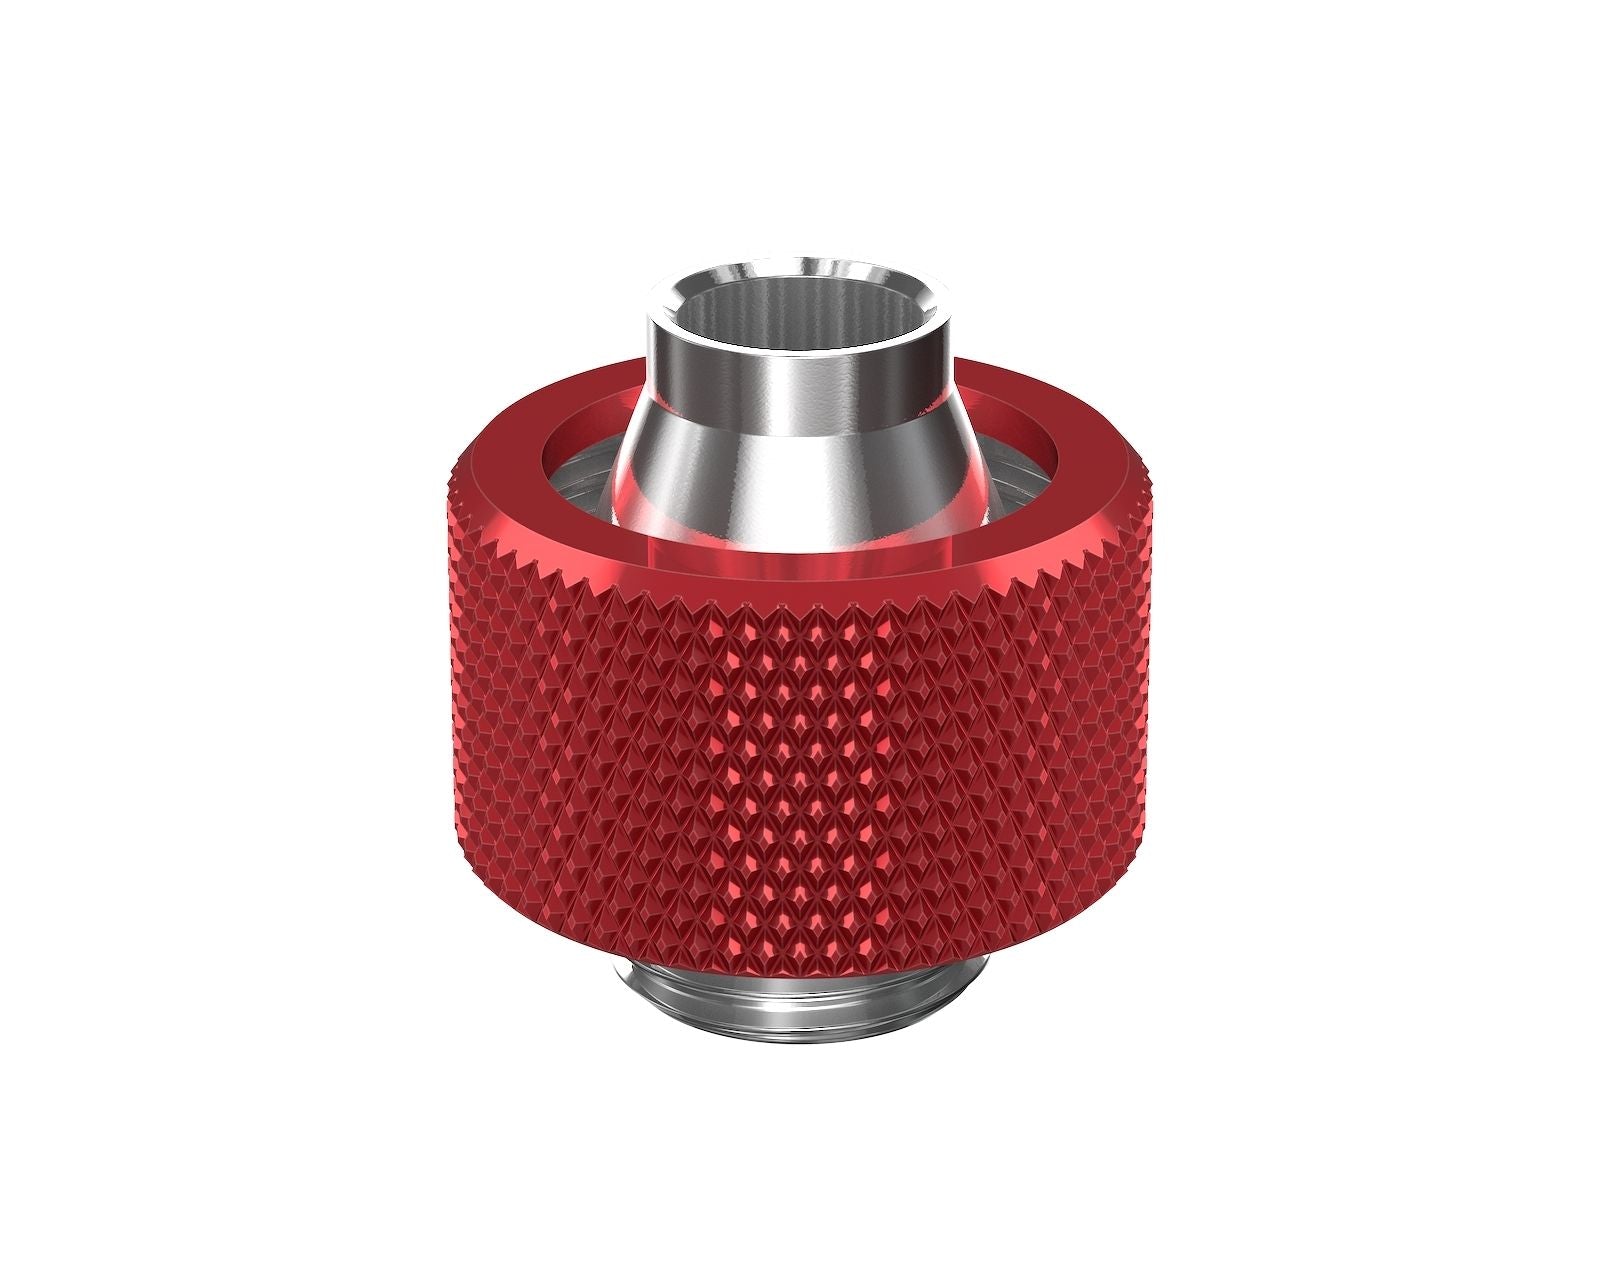 PrimoChill SecureFit SX - Premium Compression Fitting For 7/16in ID x 5/8in OD Flexible Tubing (F-SFSX758) - Available in 20+ Colors, Custom Watercooling Loop Ready - Candy Red